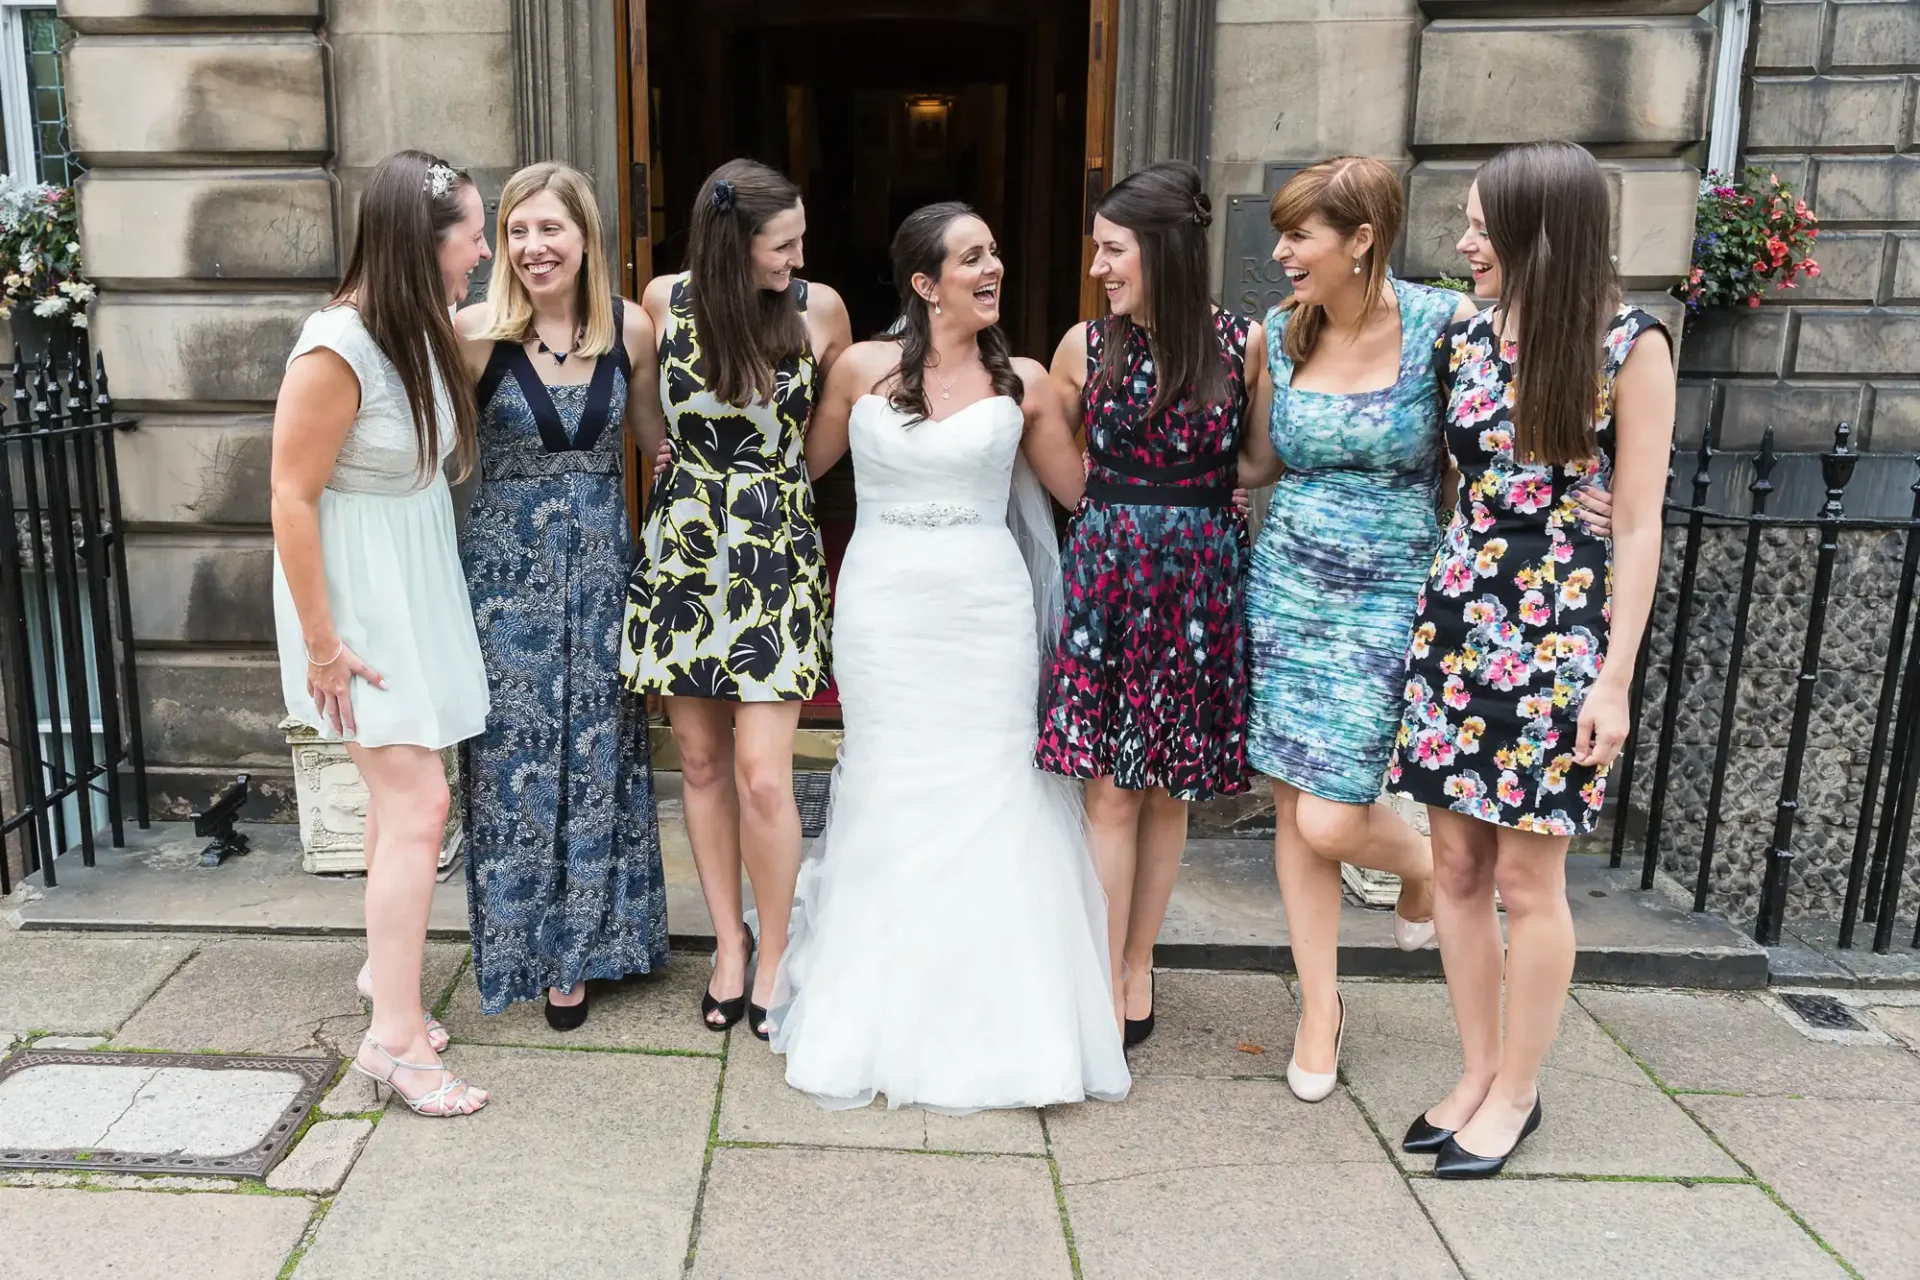 A bride in a white dress laughs with six women in floral and solid-colored dresses outside a building.